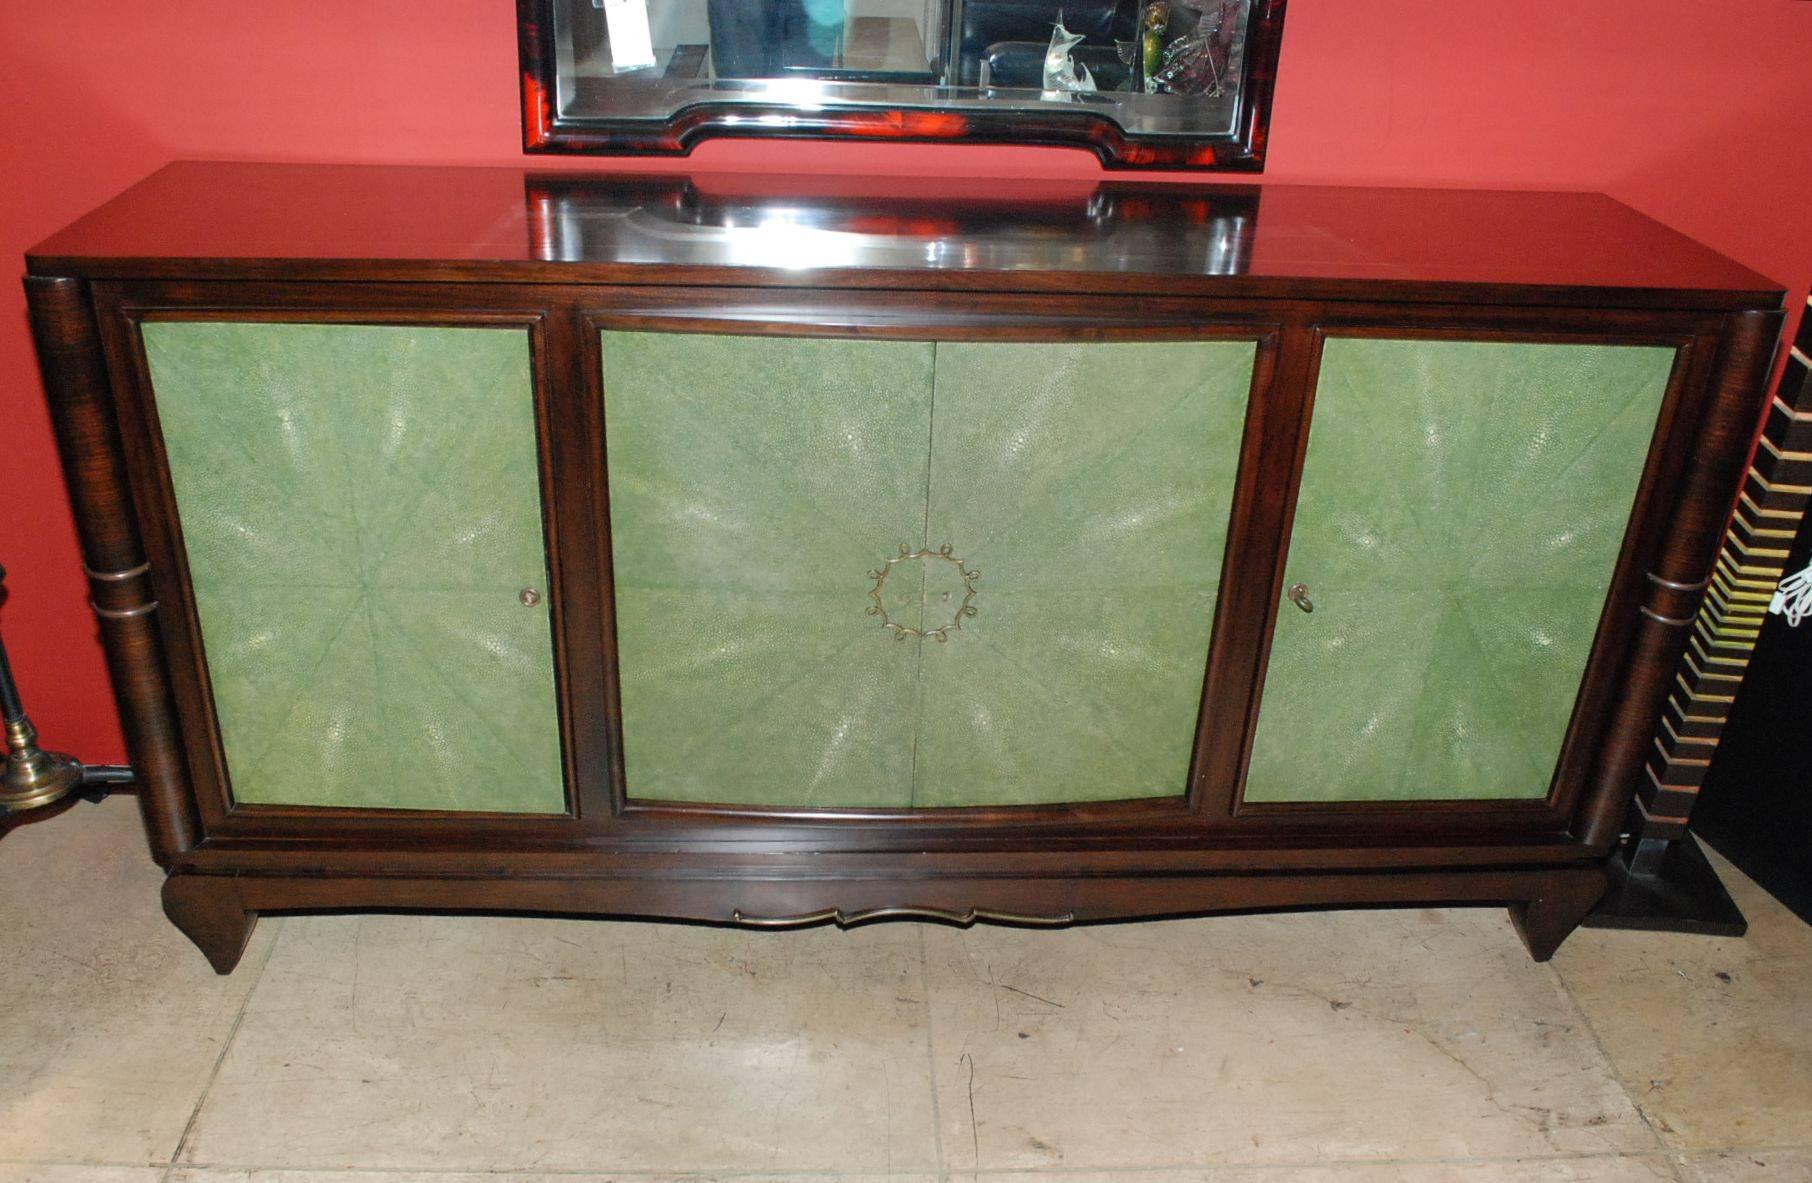 Late 1940s French parquetry top with four doors cover with original green shagreen sideboard. Bronze hardware. Inside buffet made of bleach sycamore. (One long shelf and draw).